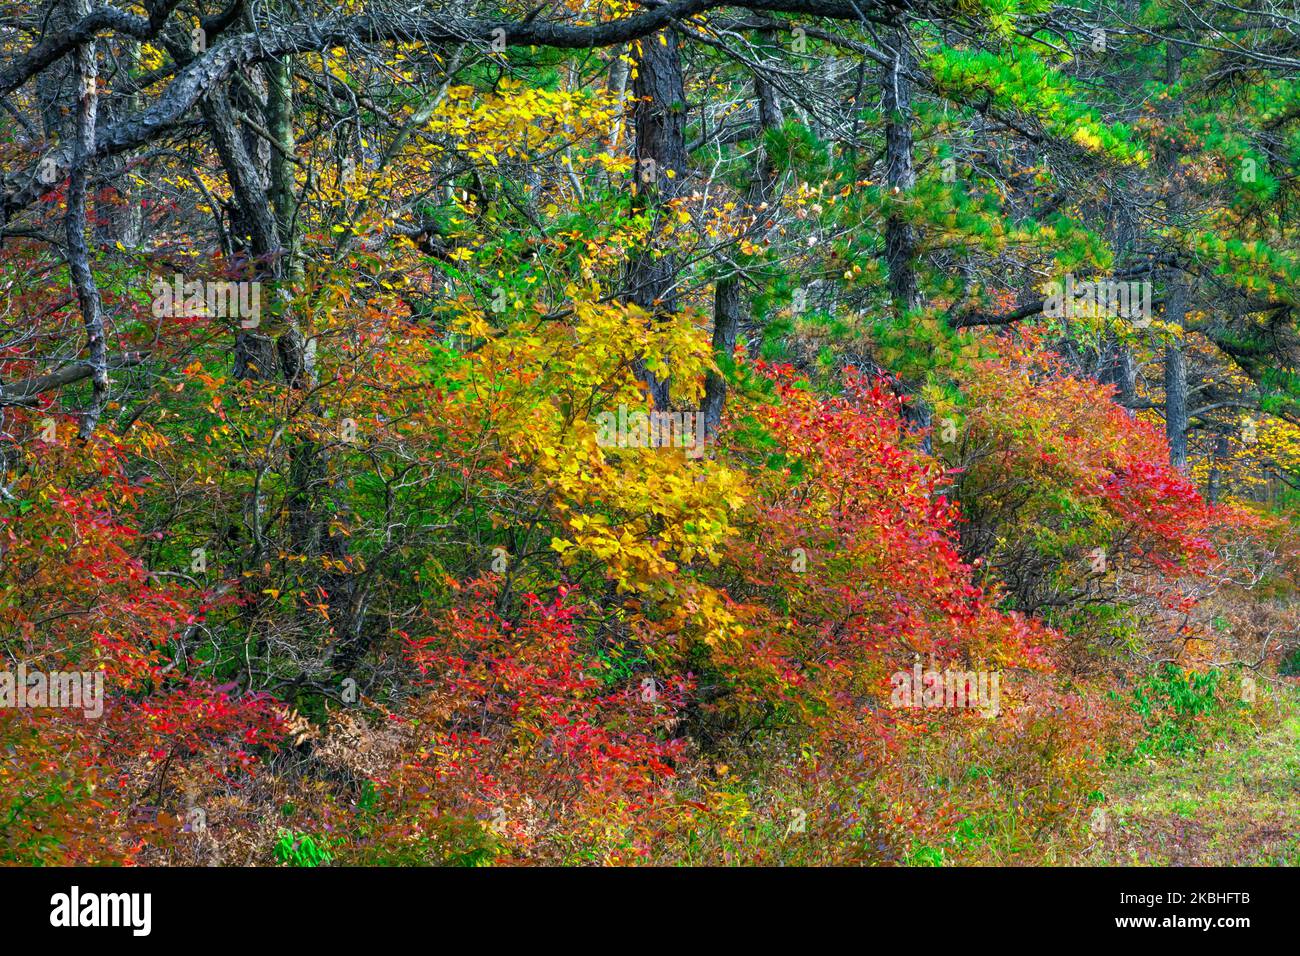 The mesic till barrens at The Nature Conservancy’s Long Pond Preserve, in Pennsylvania’s Pocono Mountains. Stock Photo